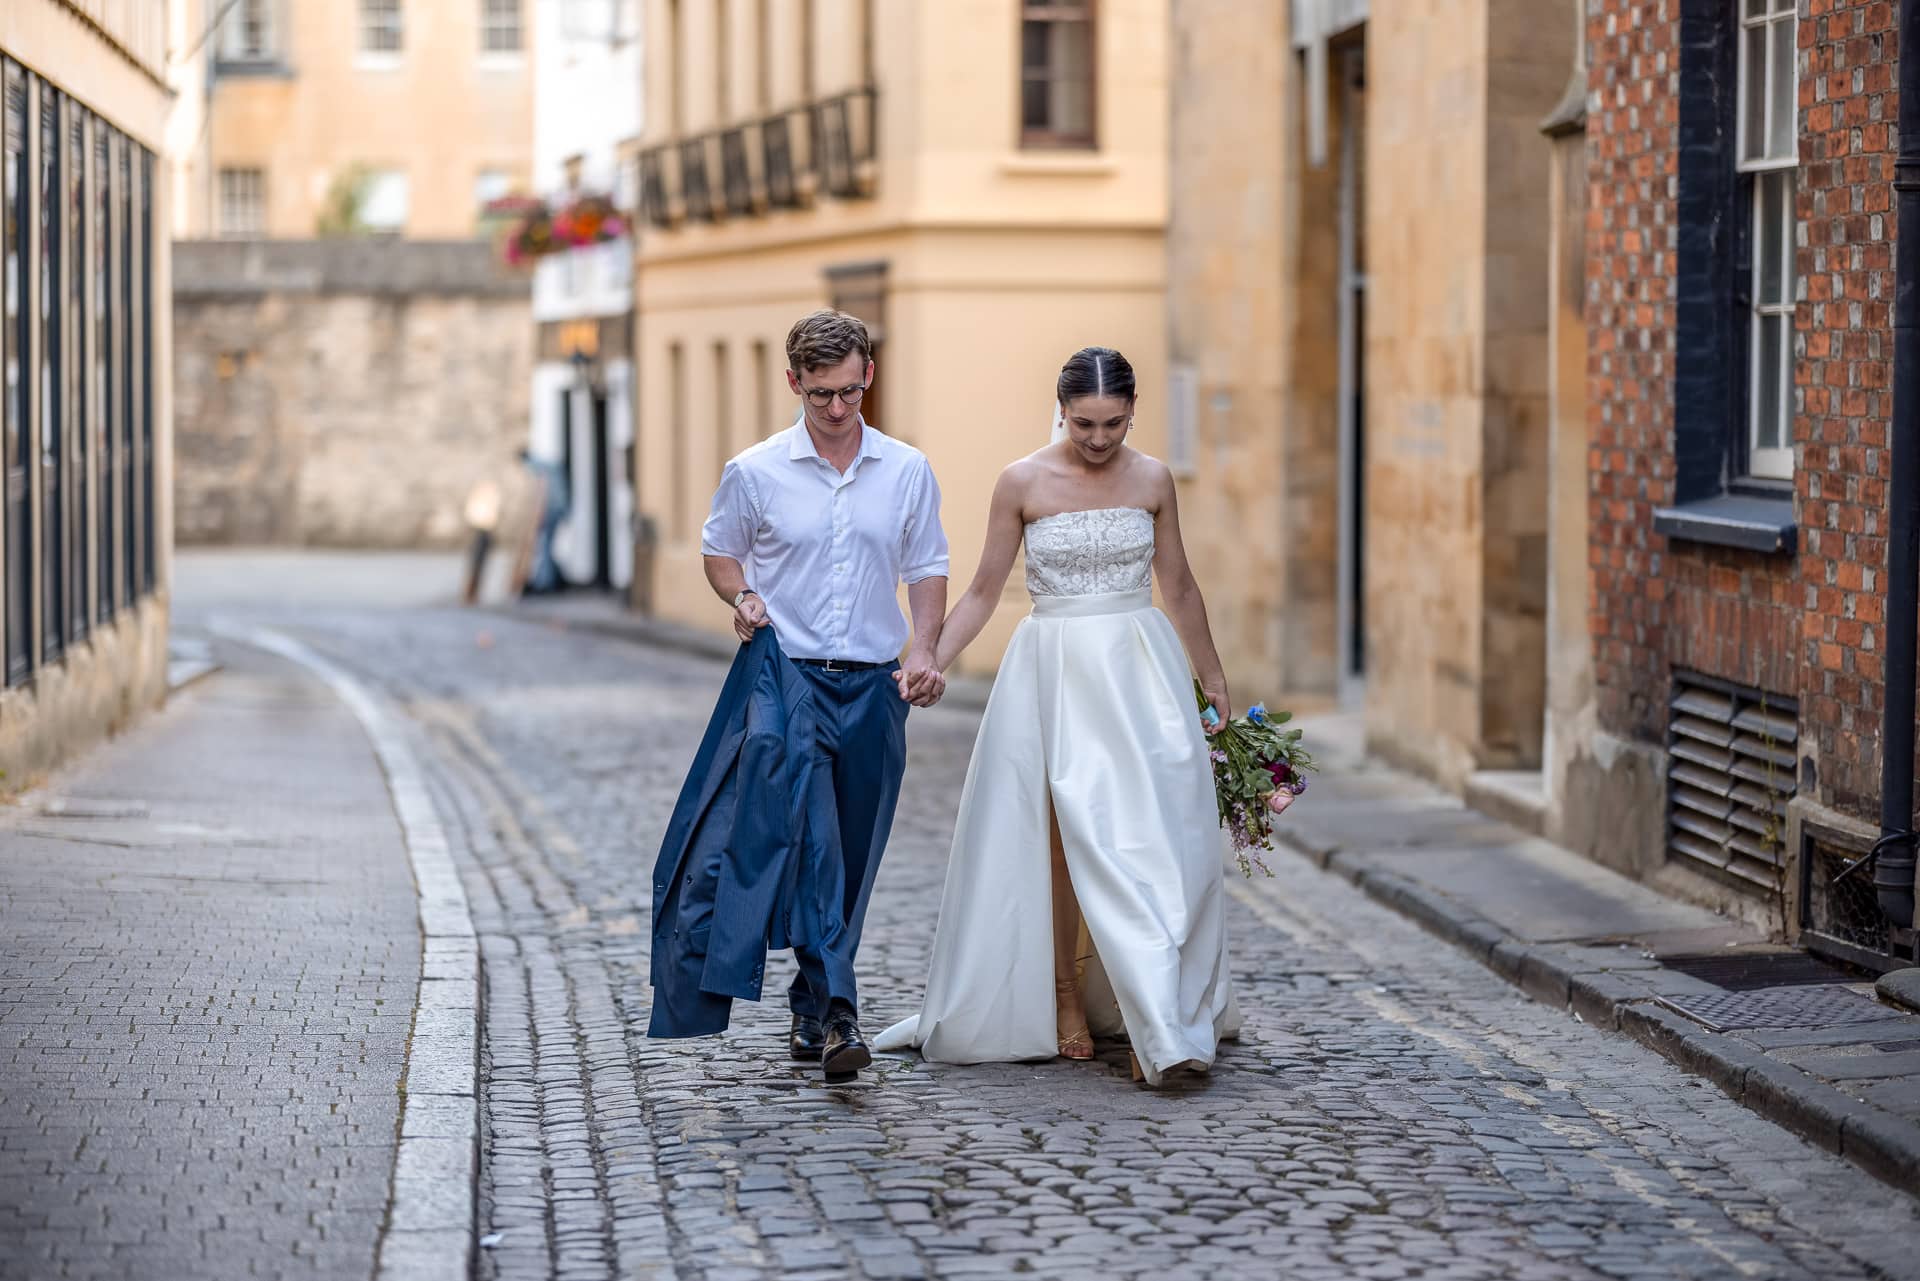 The Bride and Groom walking hand in hand on a cobbled street in Oxford.